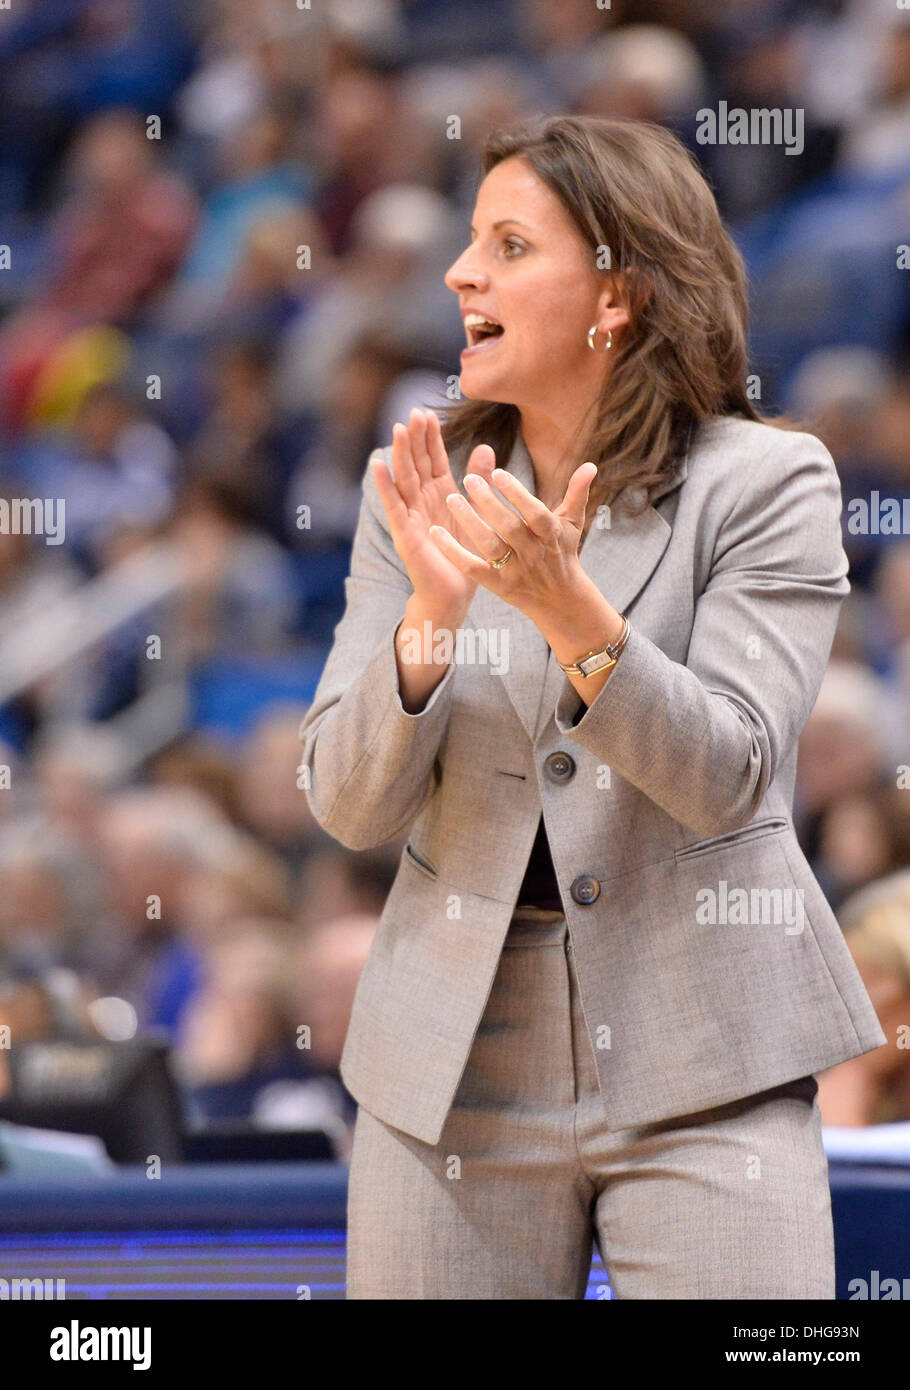 Hartford, CT, USA. 9th Nov, 2013. Saturday November 9, 2013: Hartford Hawks Head coach Jennifer Rizzotti applauds her team's play during the 1st half of the womens NCAA basketball game between Hartford and Connecticut at XL Center in Hartford, CT. UConn won easily over Hartford 89-34. Bill Shettle / Cal Sport Media. © csm/Alamy Live News Stock Photo